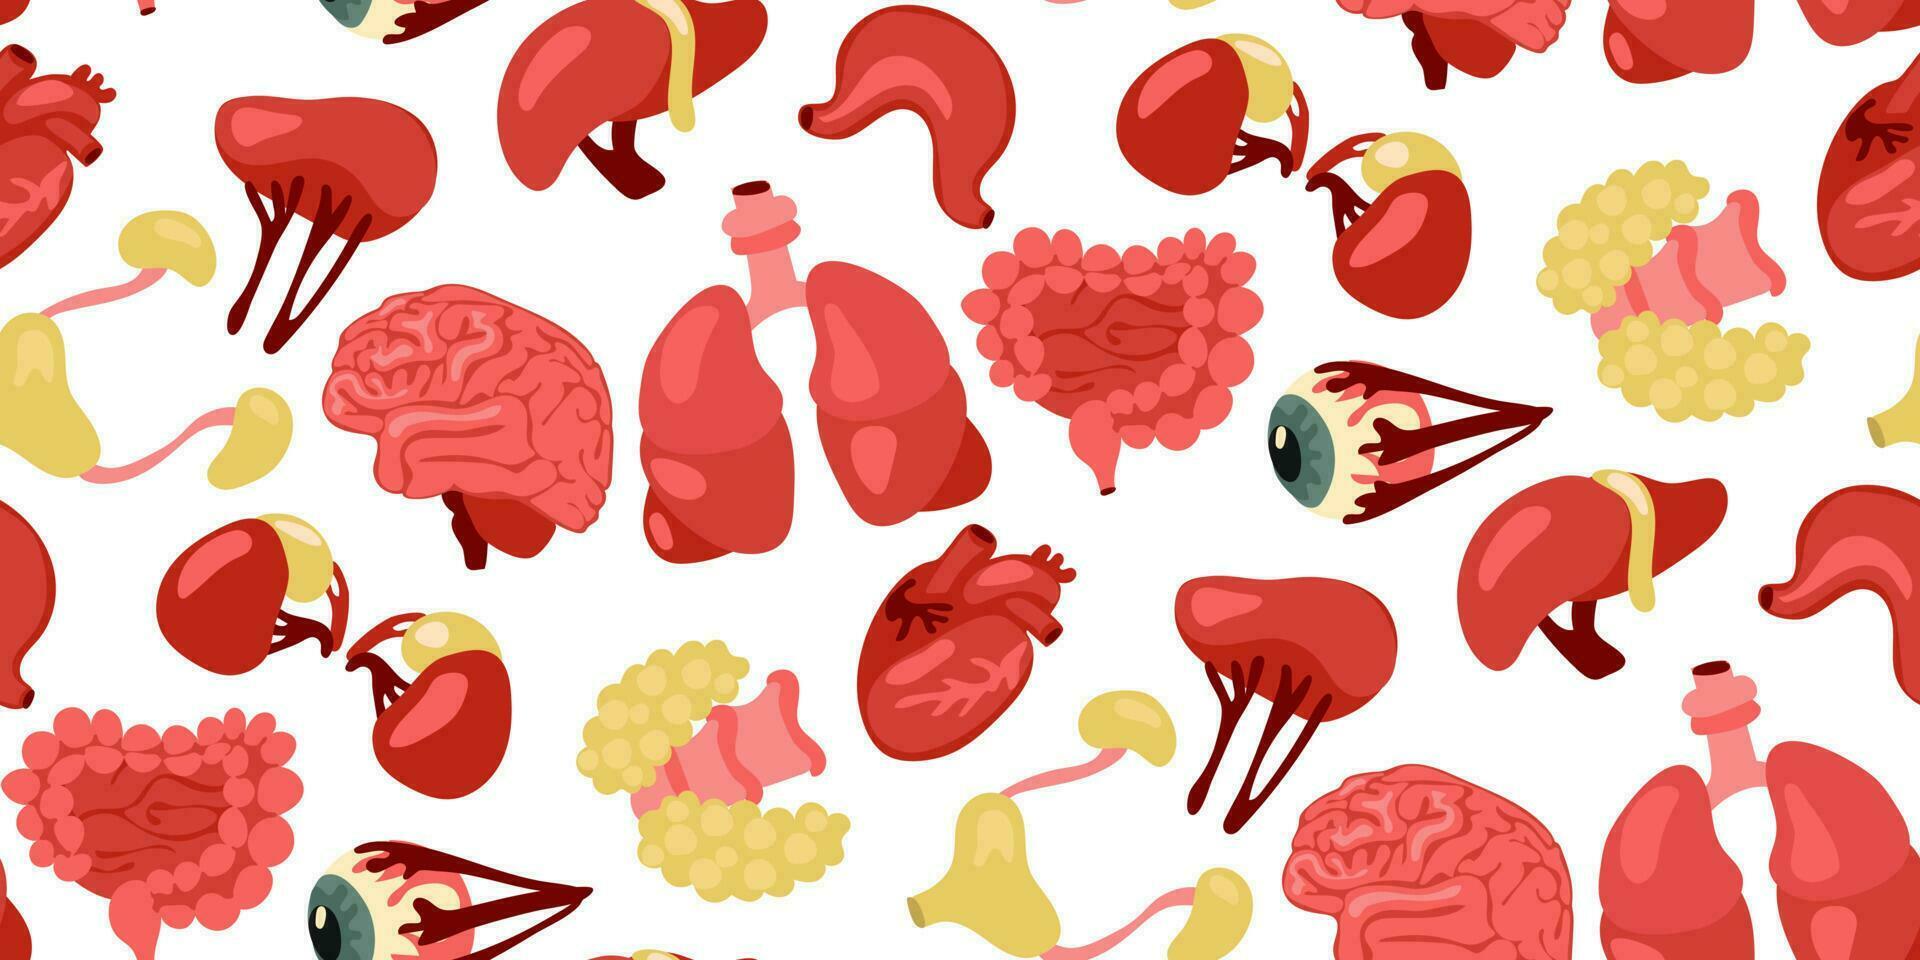 A pattern of human internal organs for operations and transplantation. Including heart, liver, kidneys, eye, bladder, pancreas brain, intestines, stomach. Flat Seamless Vector Pattern on white